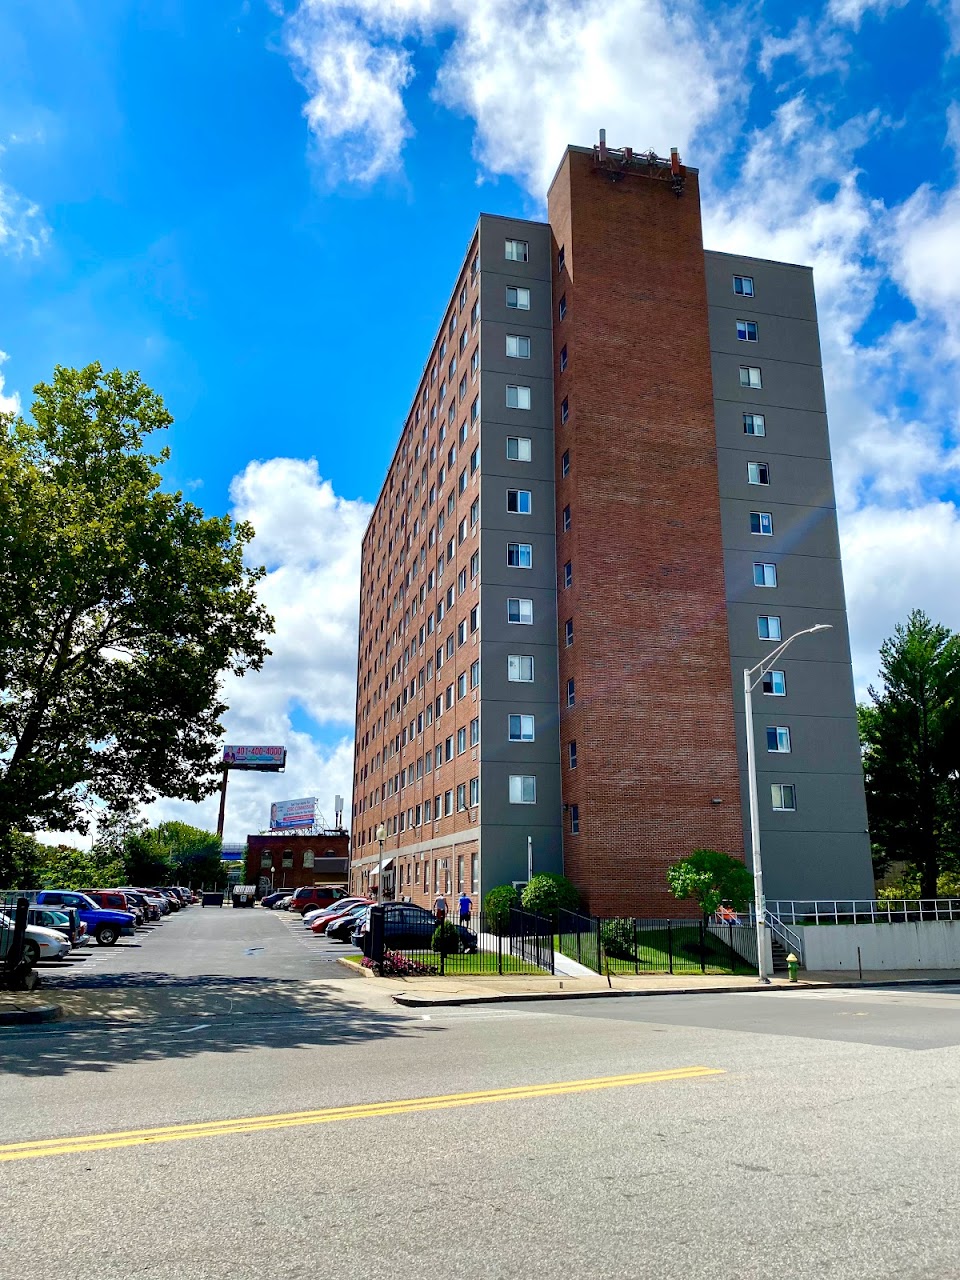 Photo of VALLEY APTS. Affordable housing located at 1 VALLEY ST PROVIDENCE, RI 2909